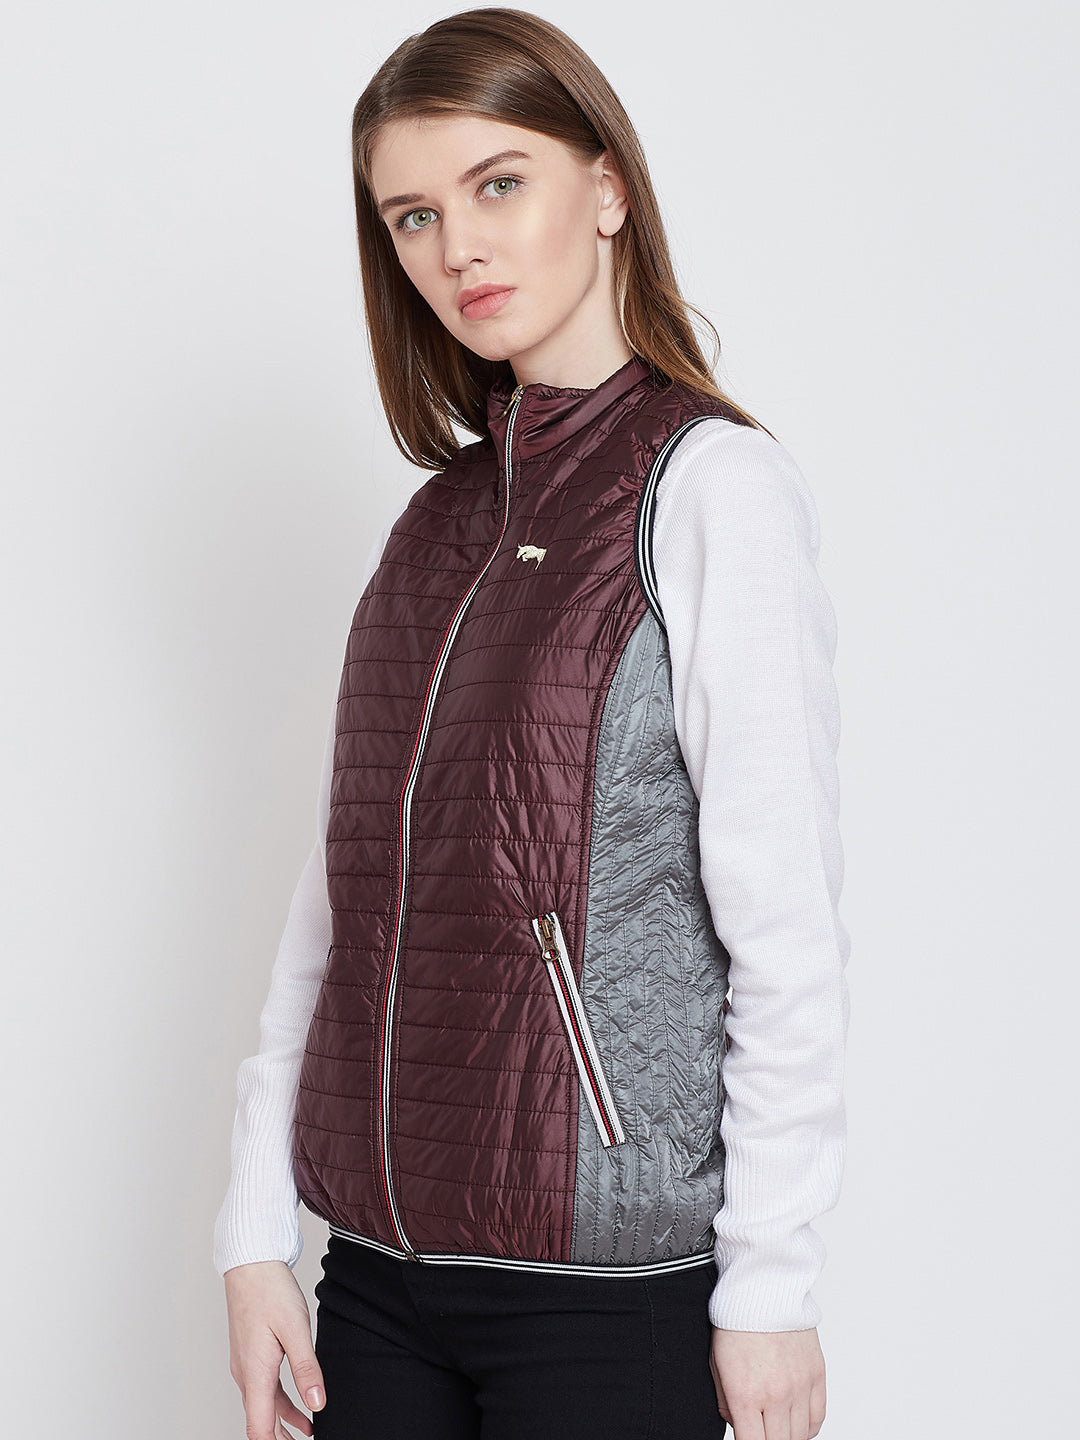 Women Casual Maroon Quilted Jacket - JUMP USA